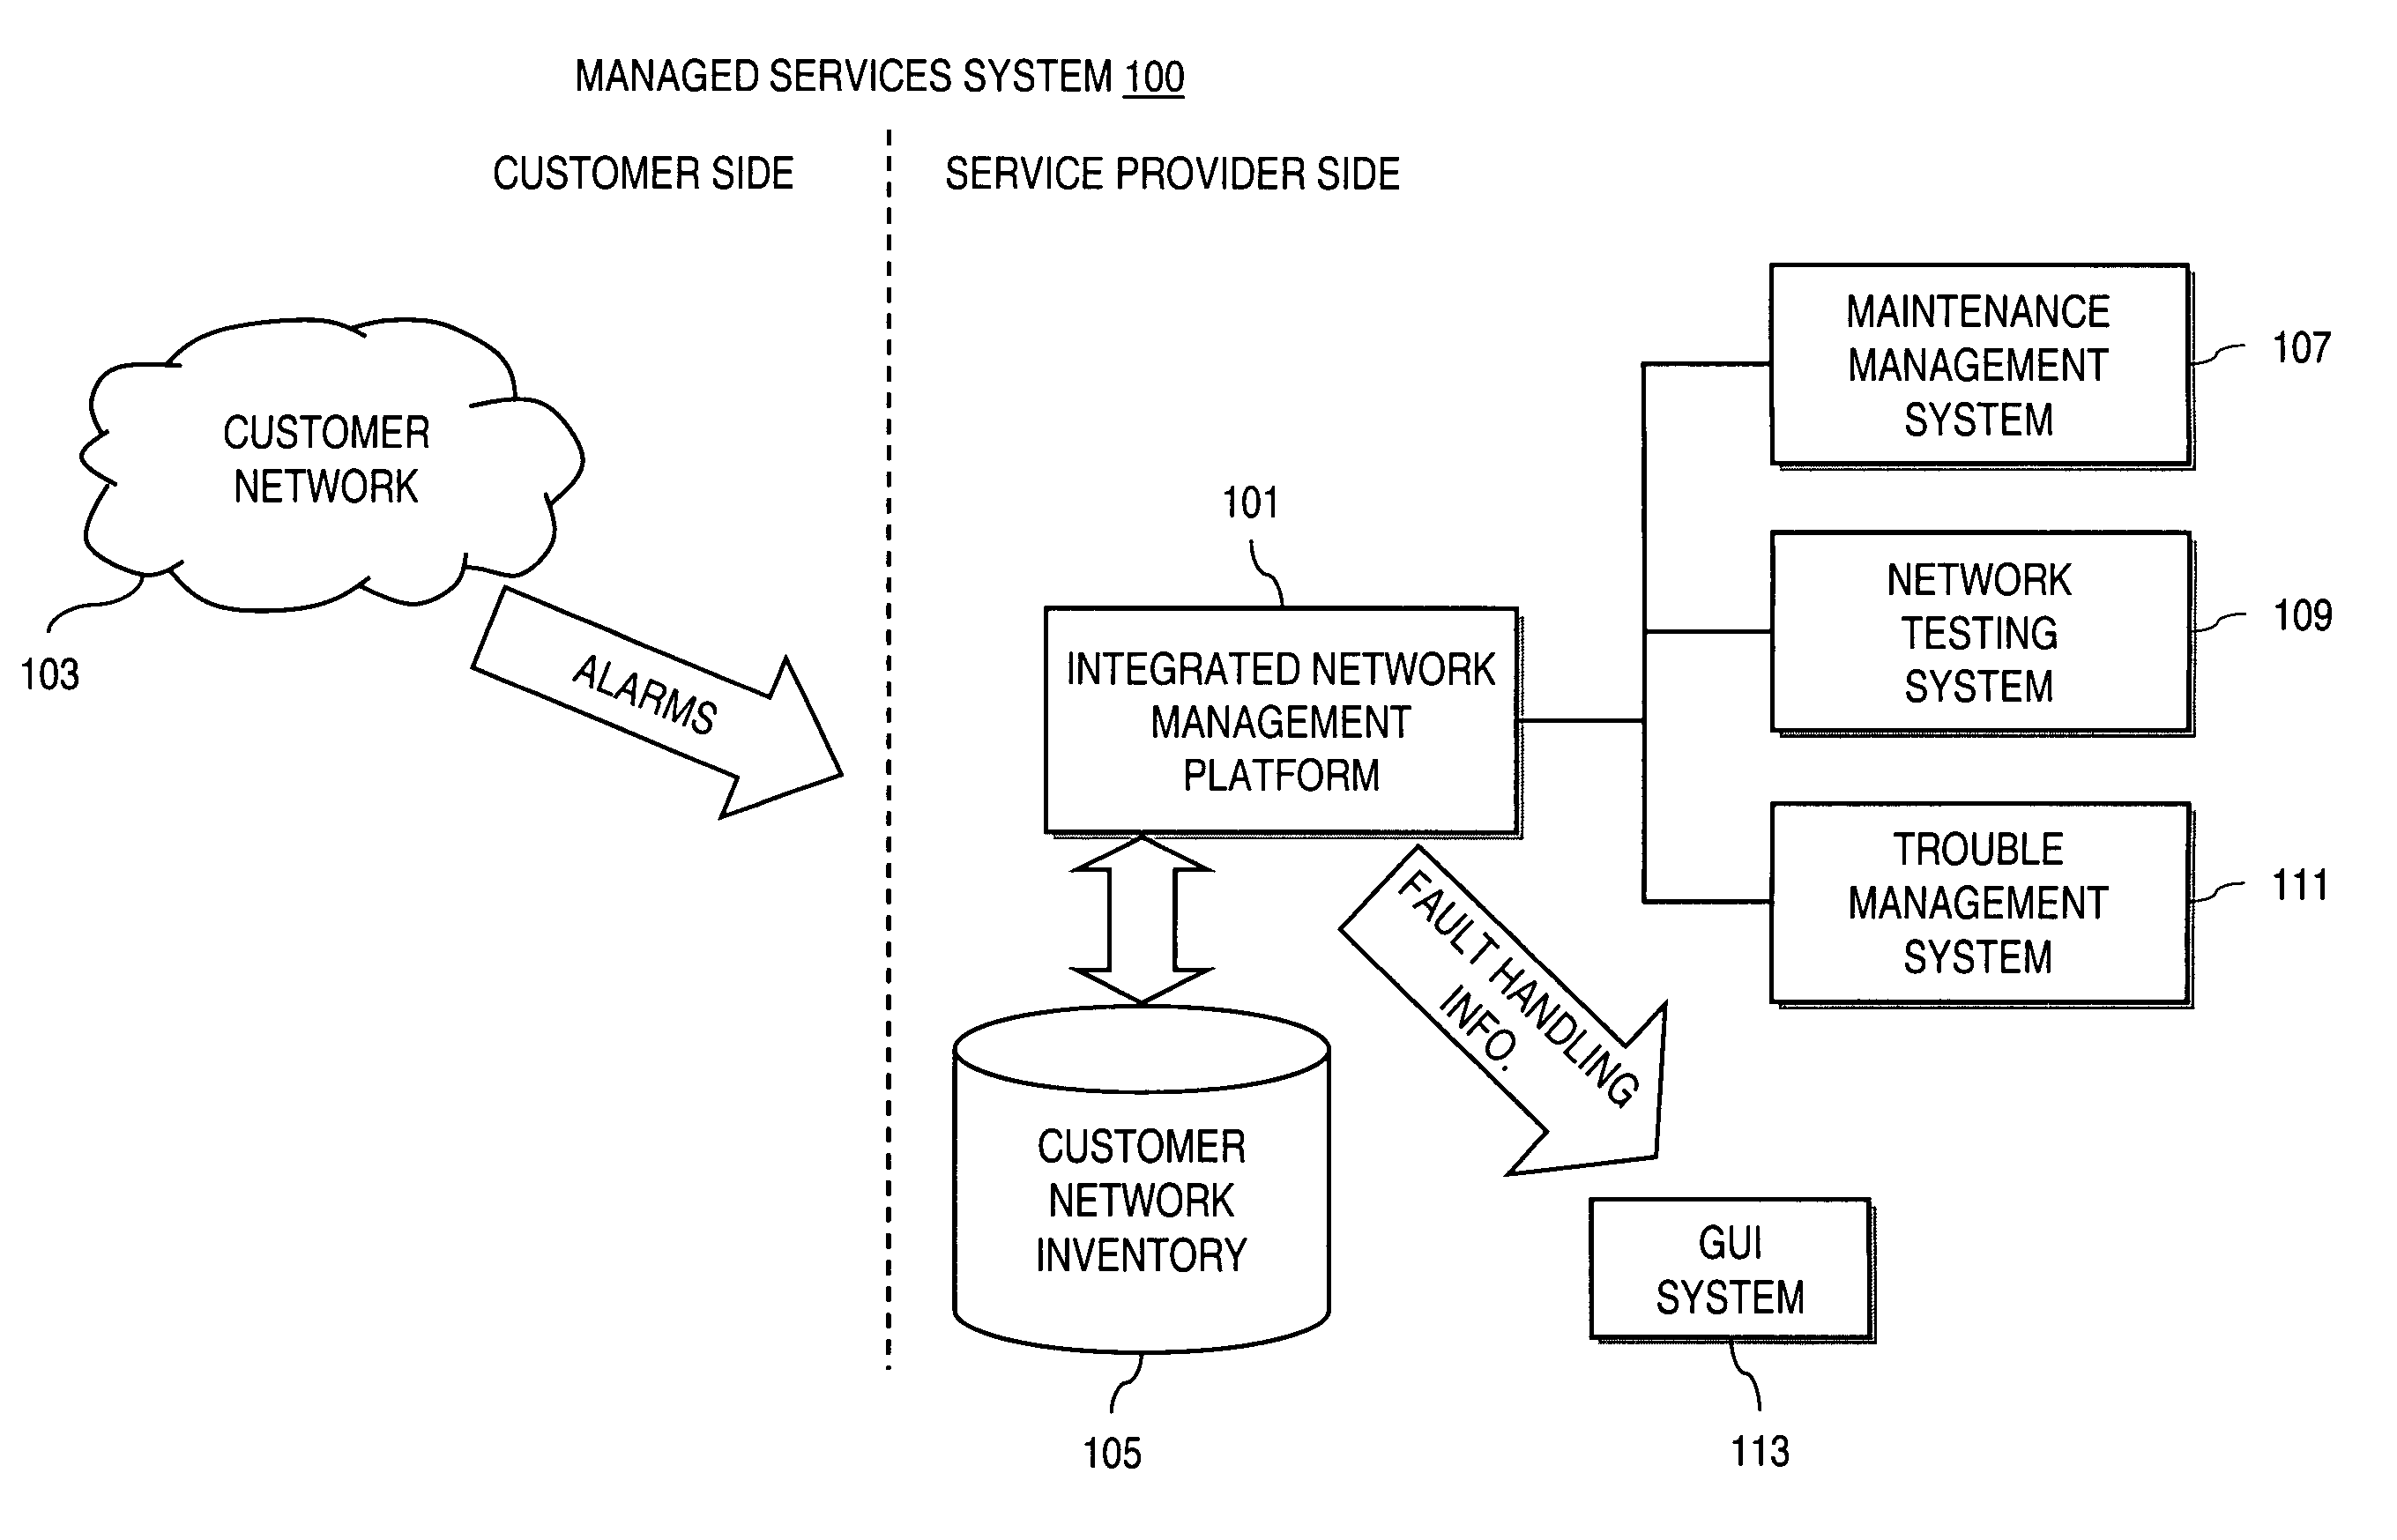 Method and system for processing fault alarms and maintenance events in a managed network services system